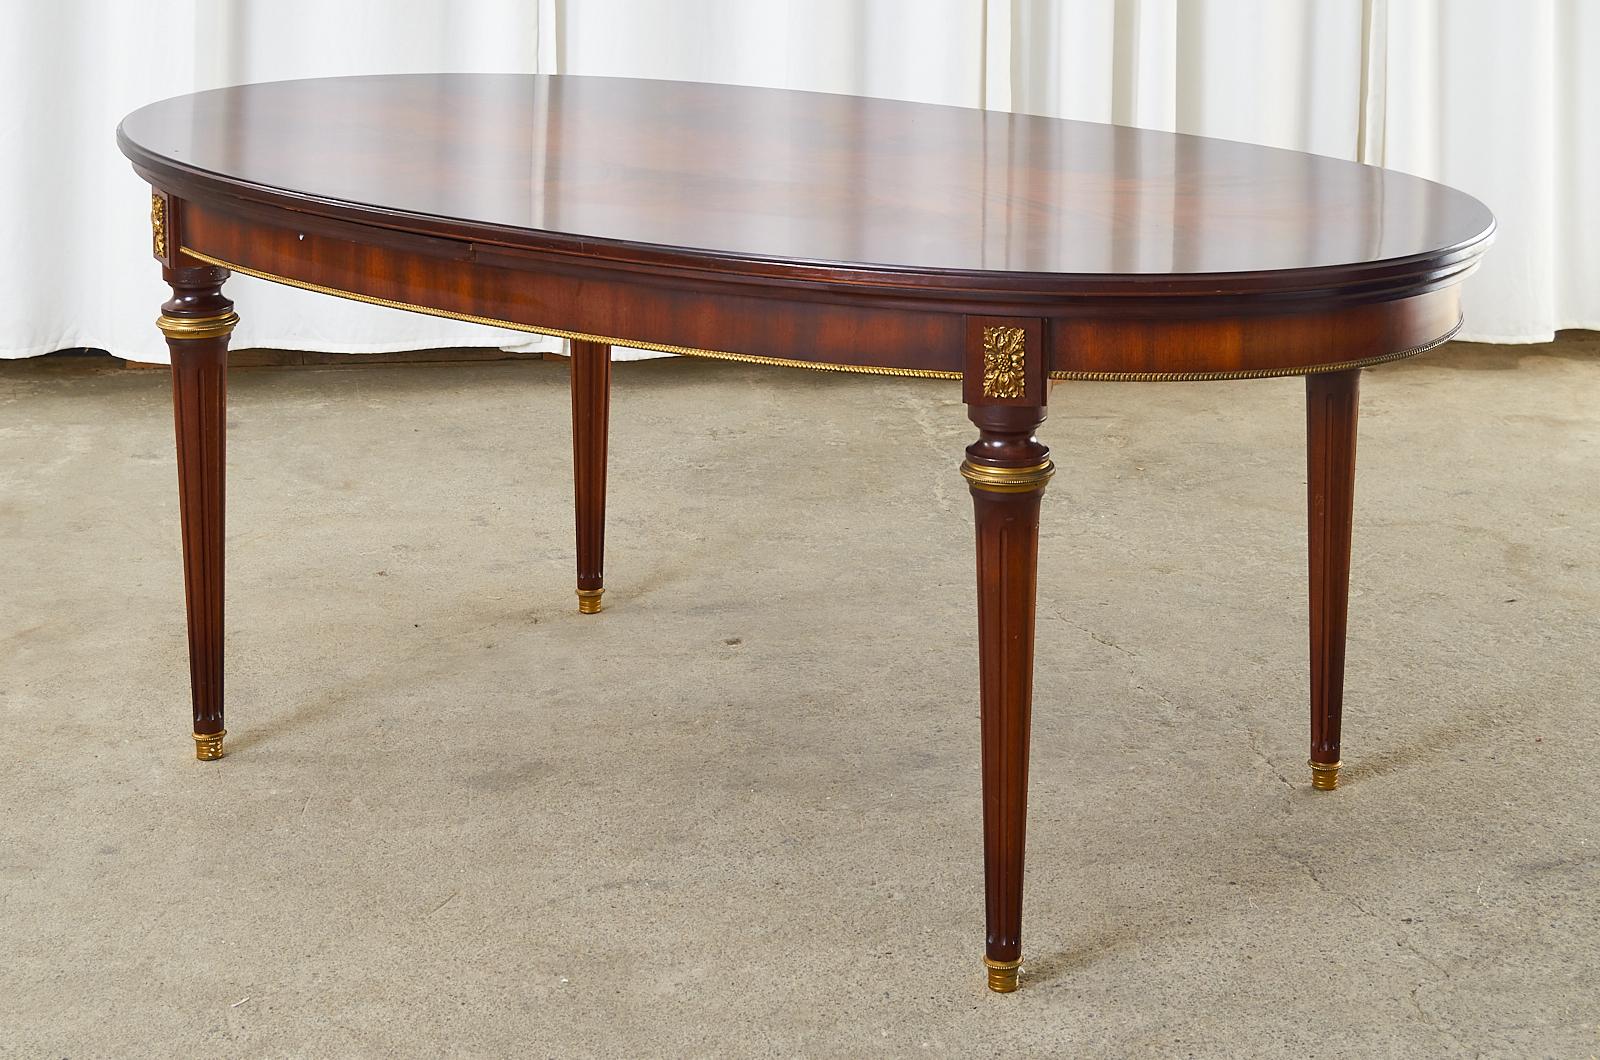 Grand French Louis XVI Style mahogany oval dining table featuring bronze ormolu mounts. Beautifully crafted with a flame match veneered top and hidden draw leaves on each side. The top measures 72 inches closed and extends to 108 inches open. Each